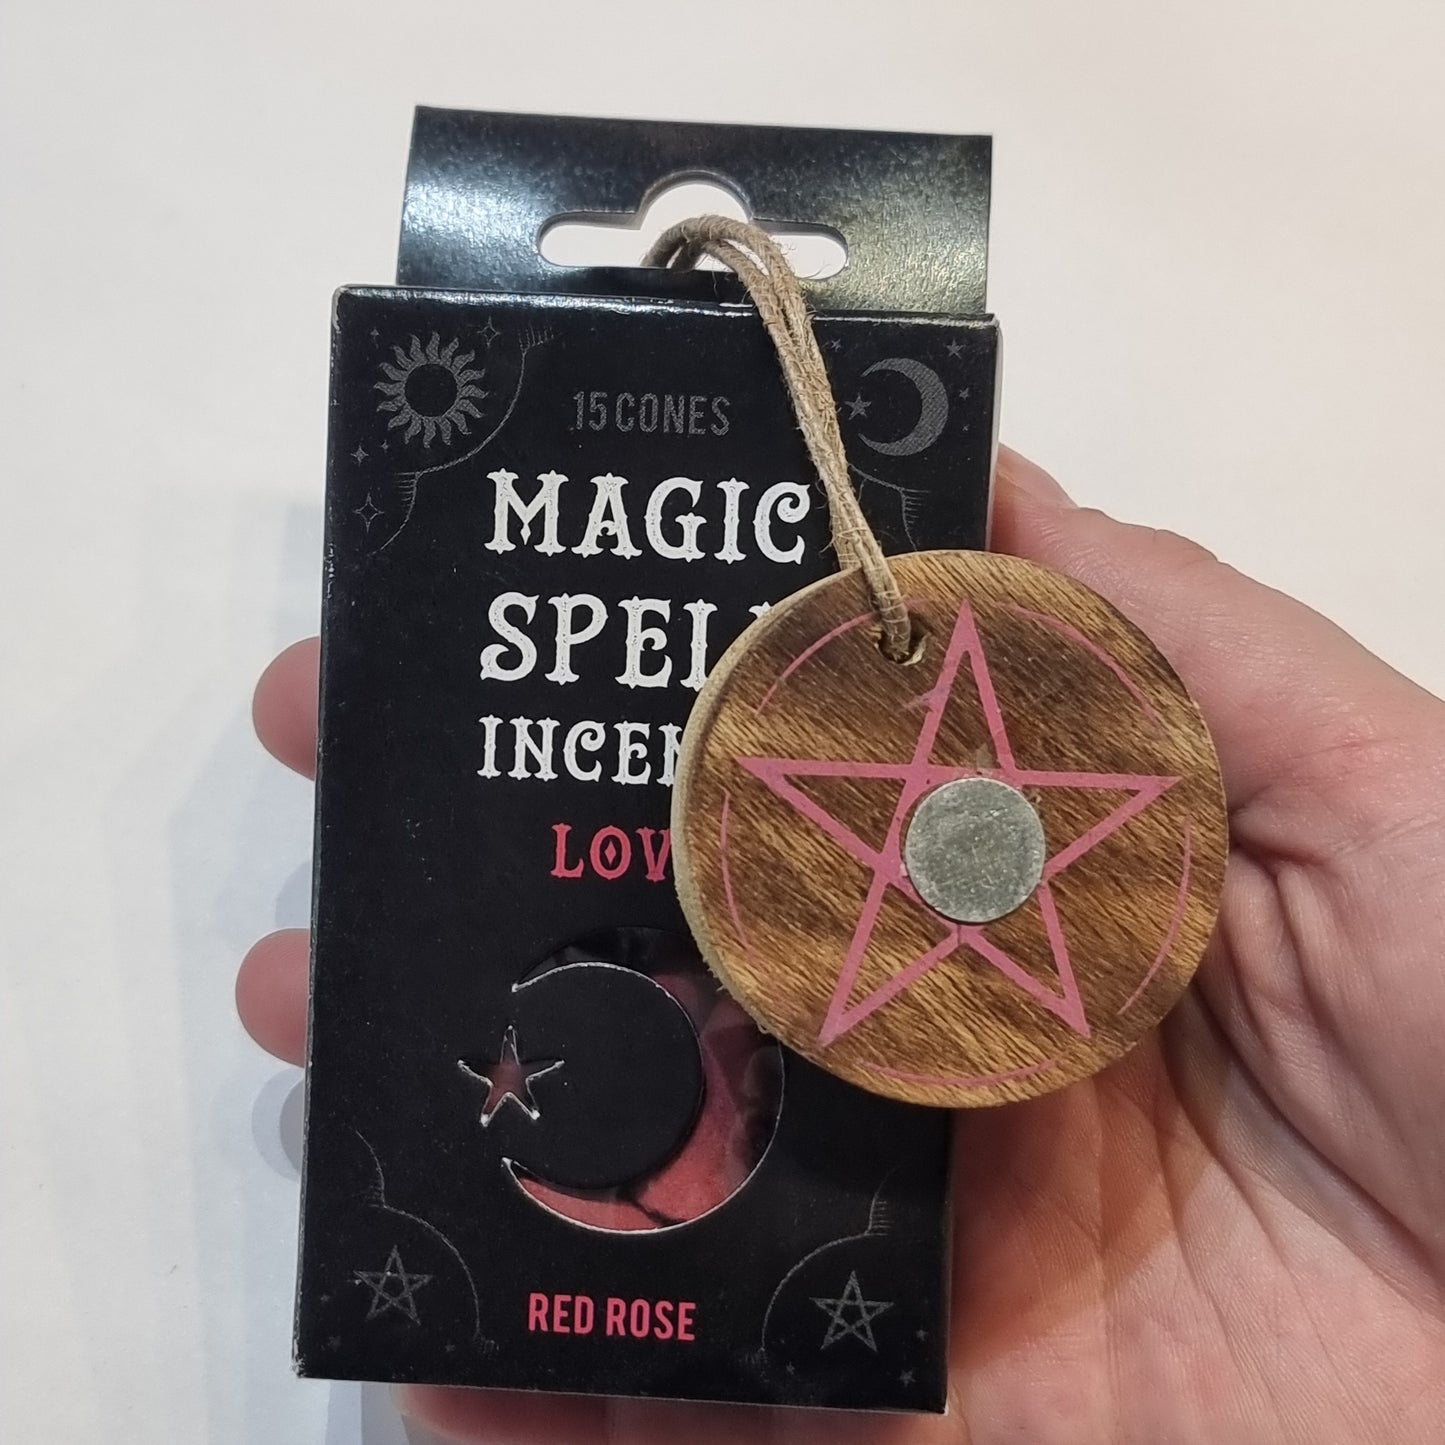 Magic spell incense cones - red rose - Rivendell Shop